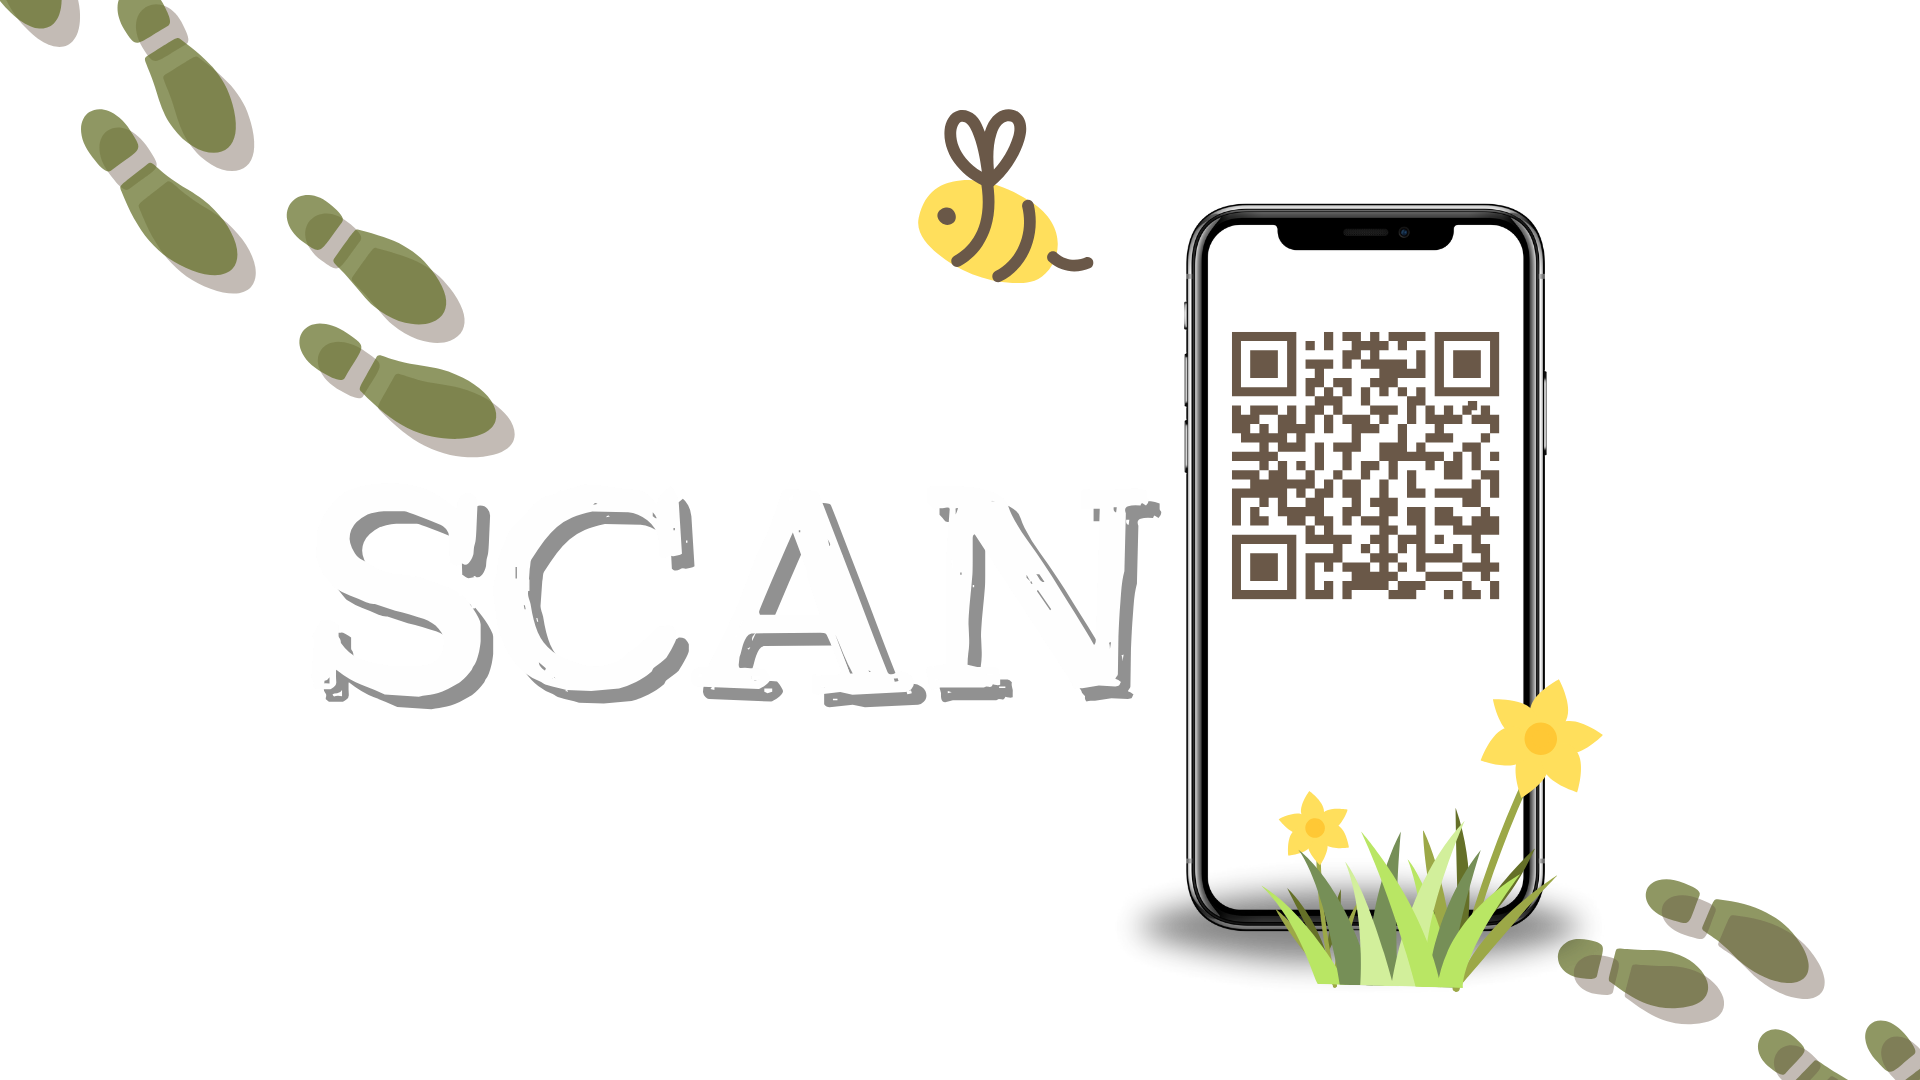 Mobile Phone scanning a QR code with a bumble bee and text reading SCAN and footprints in the mud